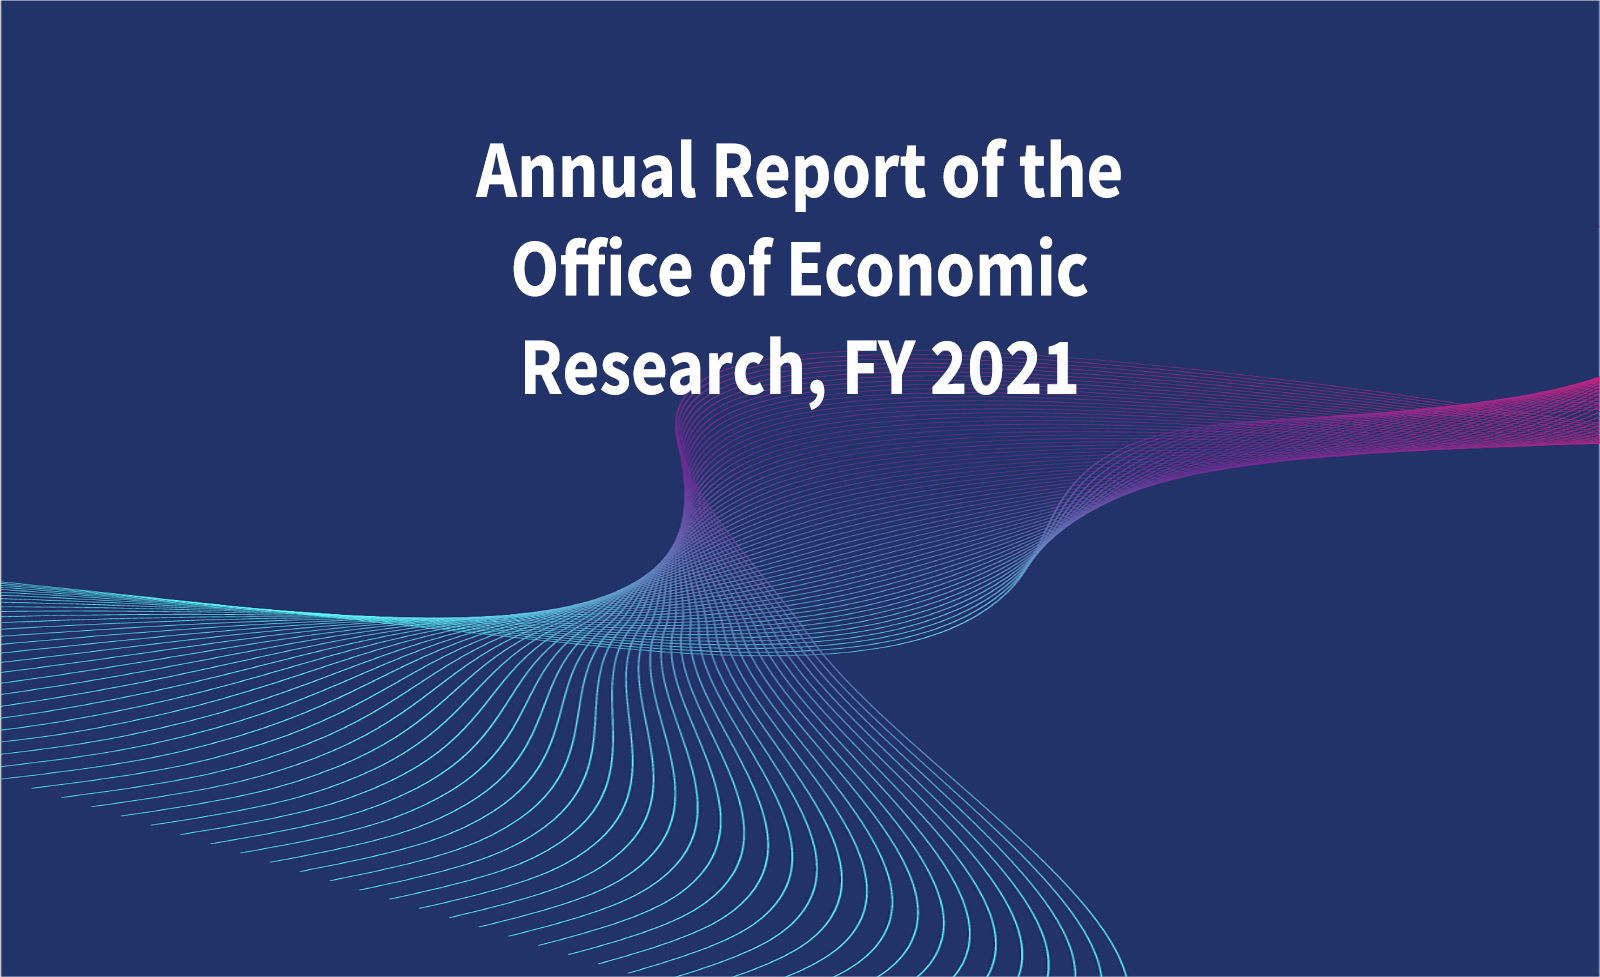 Annual Report of the Office of Economic Research, FY 2021